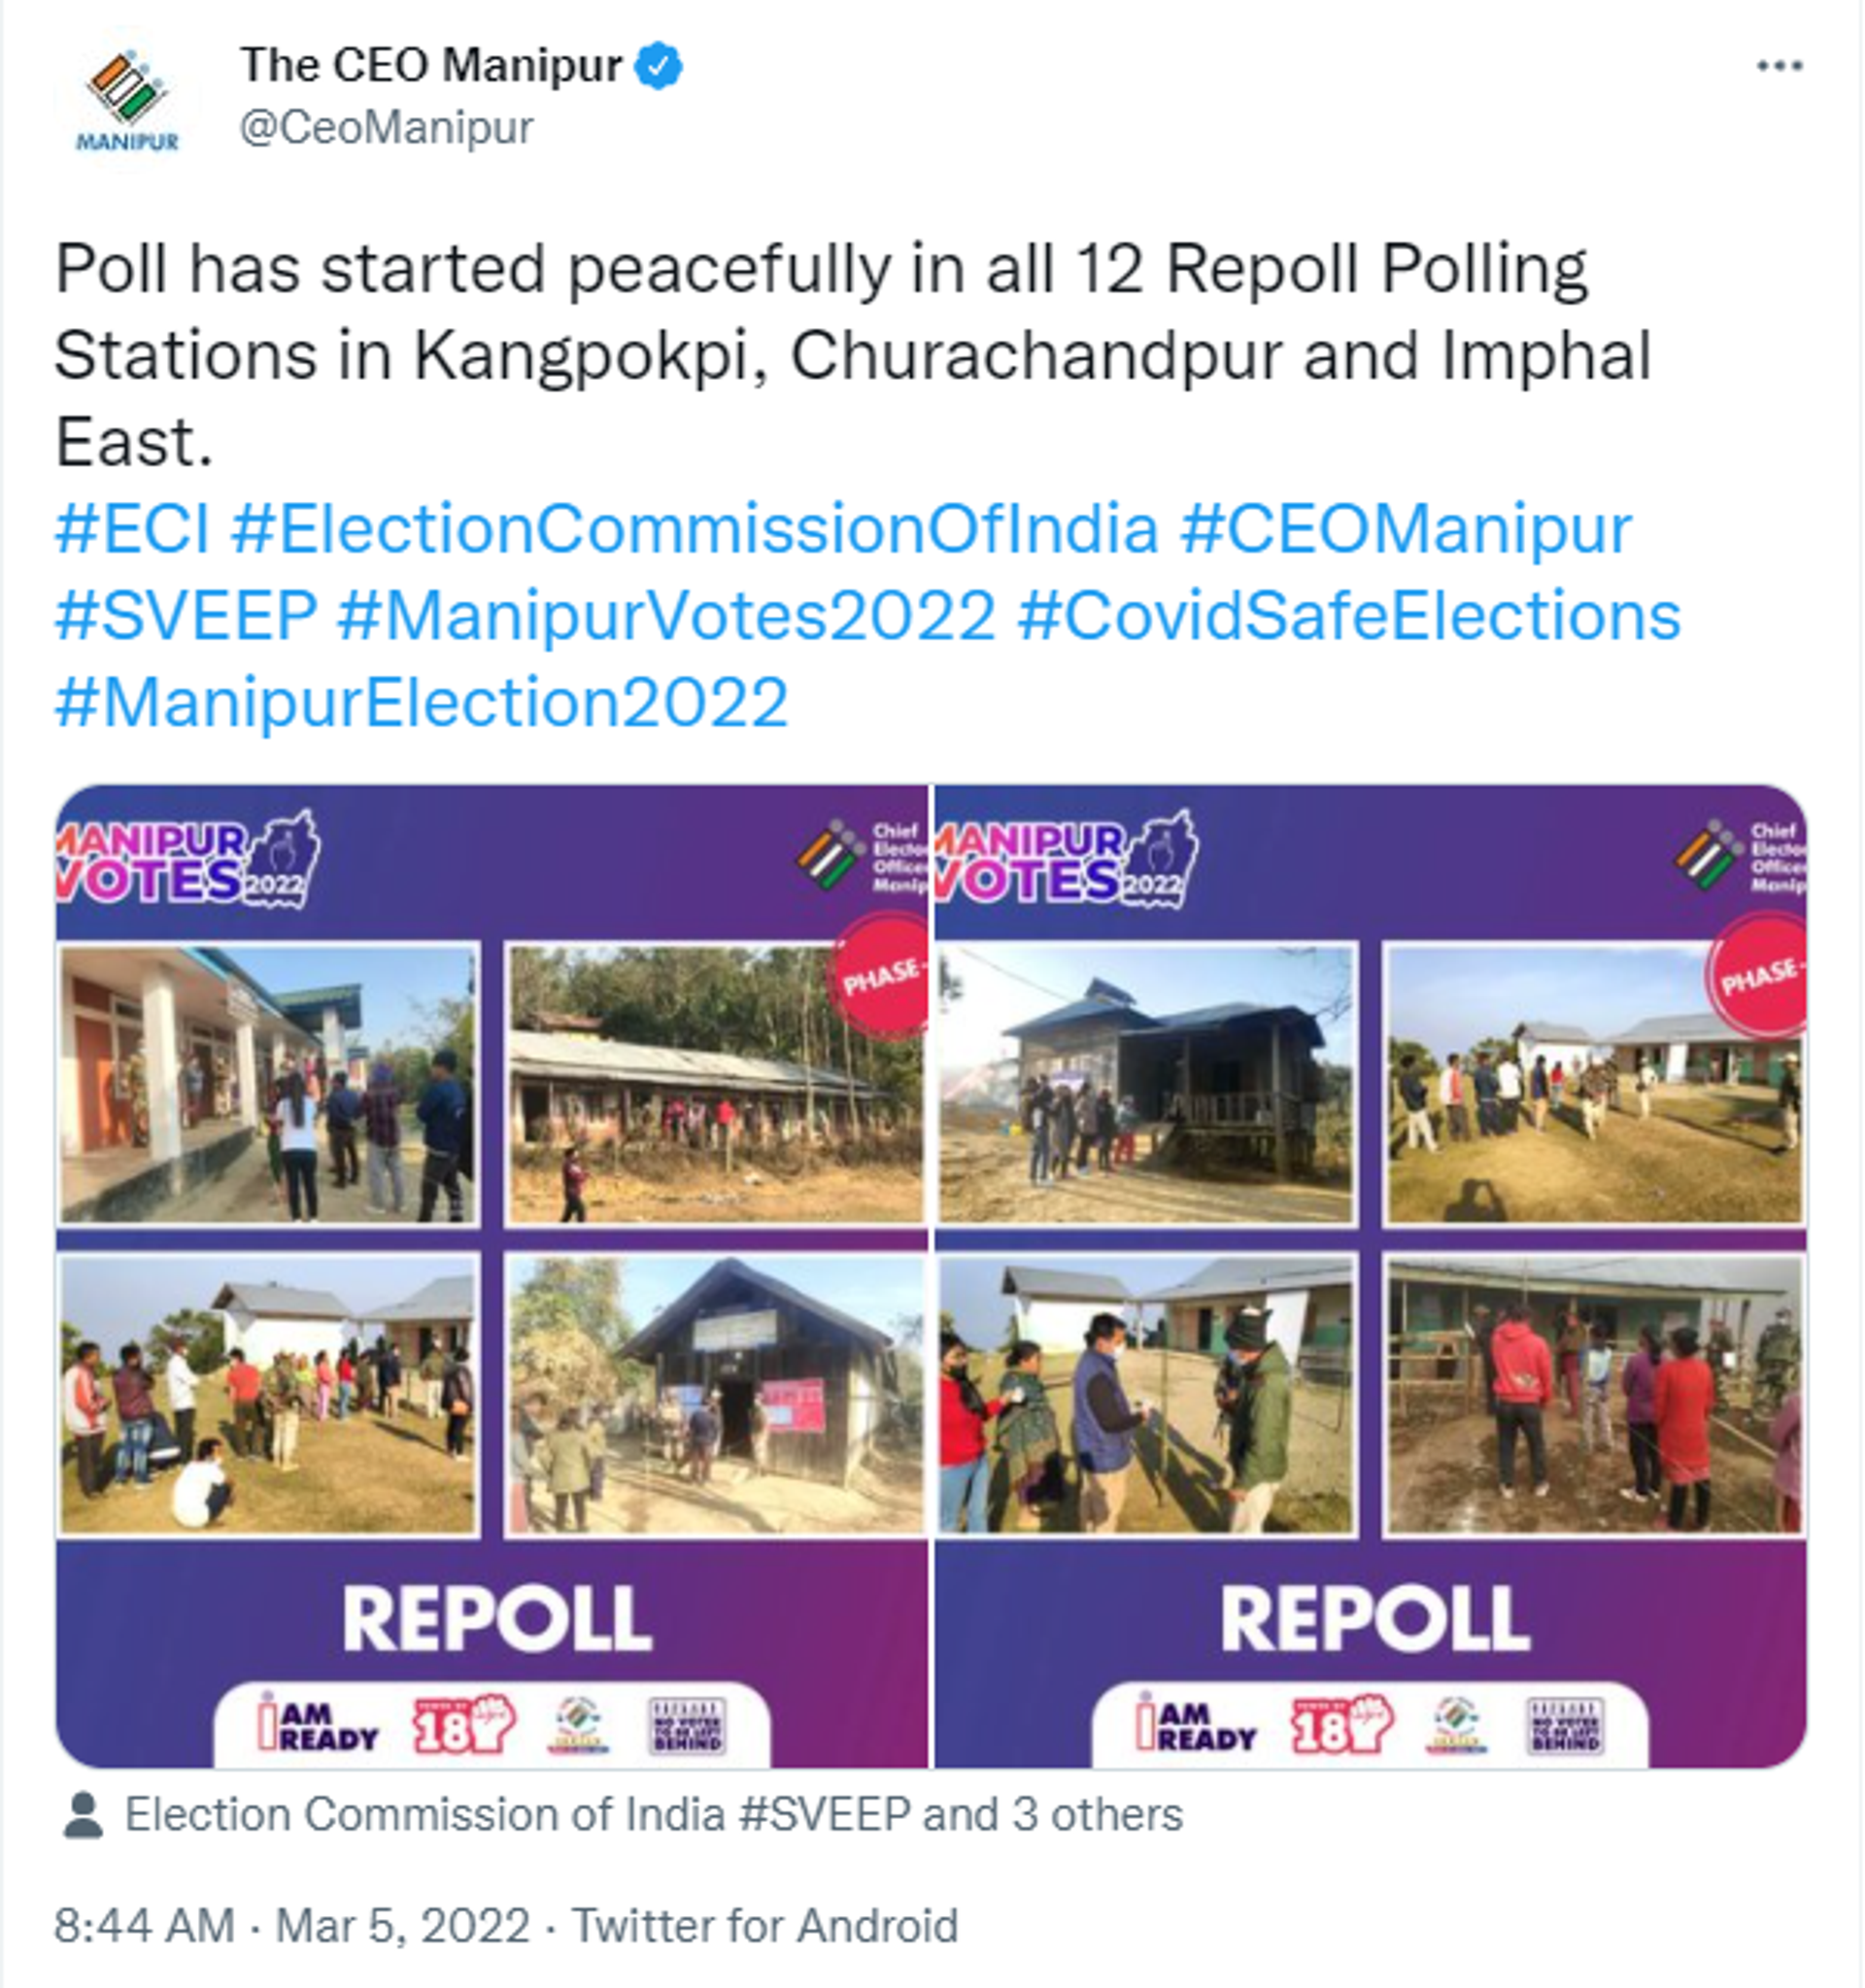 Poll has started peacefully in all 12 Repoll Polling Stations in Kangpokpi, Churachandpur and Imphal East - Sputnik International, 1920, 05.03.2022